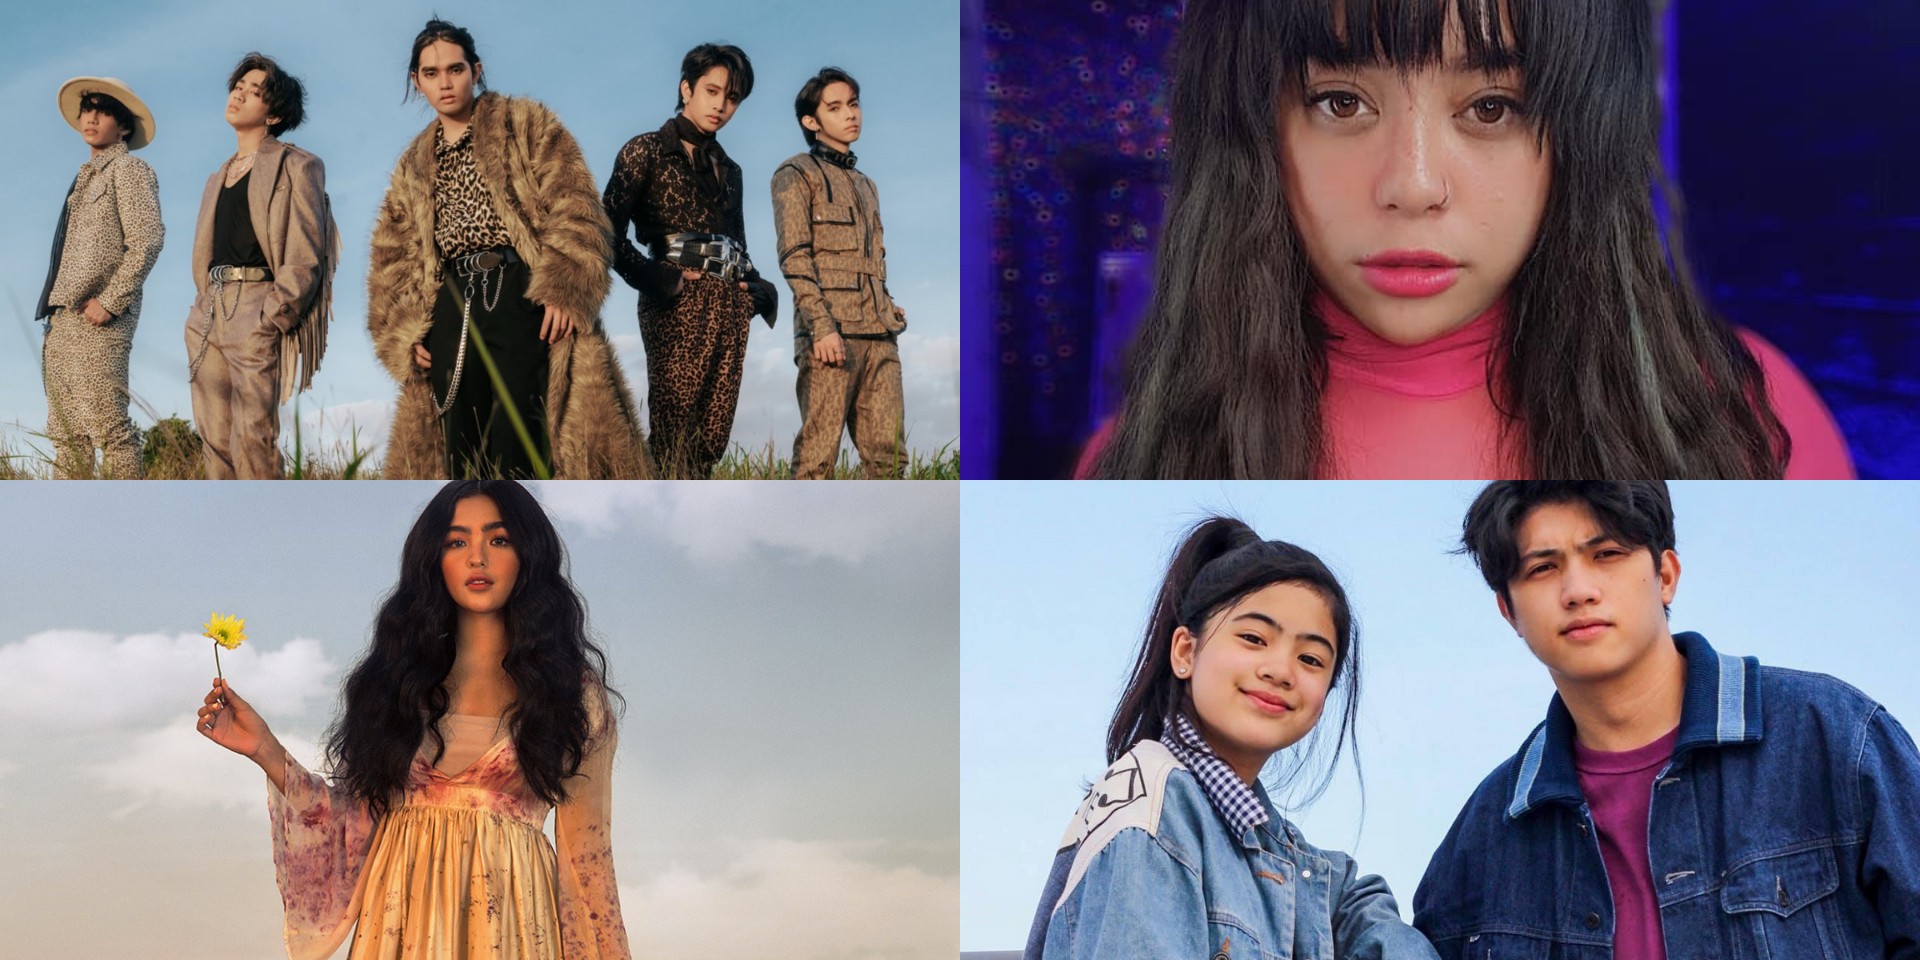 Here are the winners of the TikTok Awards Philippines 2021 – SB19, Ranz & Niana, Andrea Brillantes, Zendee, and more